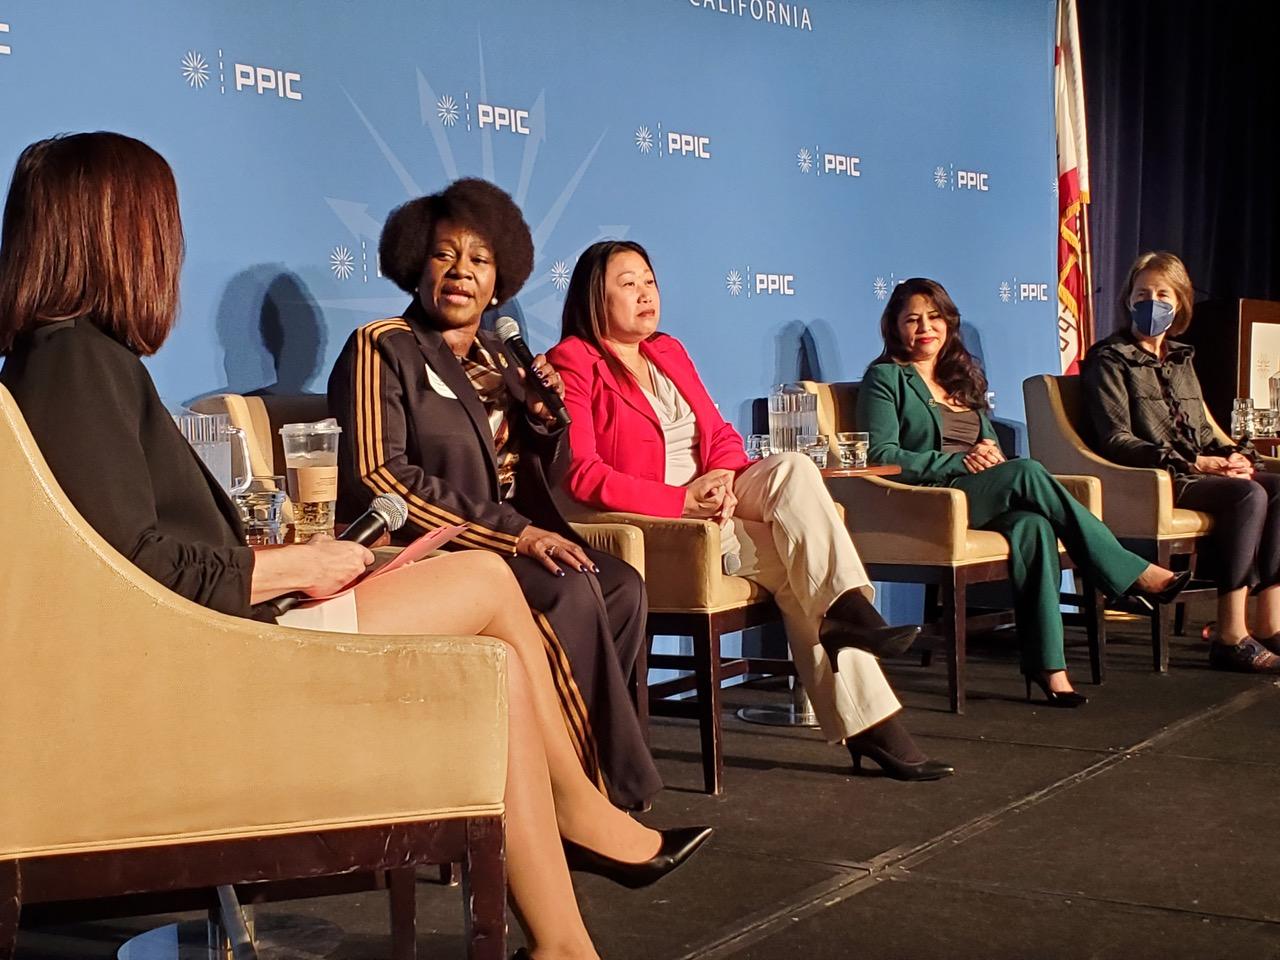 Left, Former Supreme Court Chief Justice Tani Cantil-Sakauye, PPIC’s president and chief executive officer, was the moderator of the event. Left to right, Assemblymember Tina McKinnor (D-Inglewood), District 61; state Sen. Janet Nguyen (R-Garden Grove), District 36; Assemblywoman Liz Ortega (D-San Leandro), District 20; and Sen. Nancy Skinner (D-Berkeley) of District 9. The Women in California’s Legislature event was hosted by PPIC in Sacramento on March 8, 2023. CBM photo by Antonio Ray Harvey.